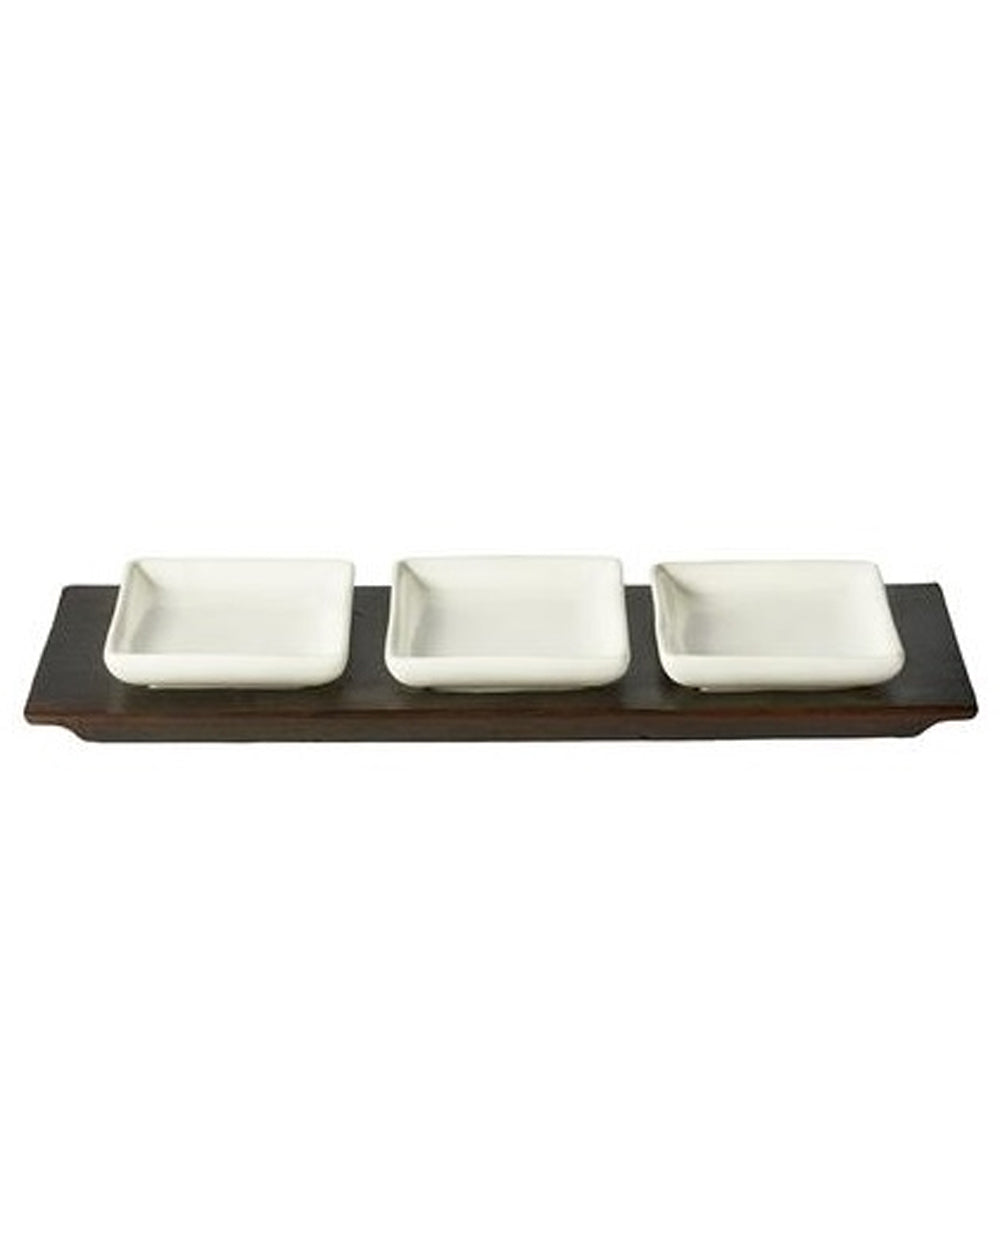 Tres Servidor Cast Iron Tray with Bowls